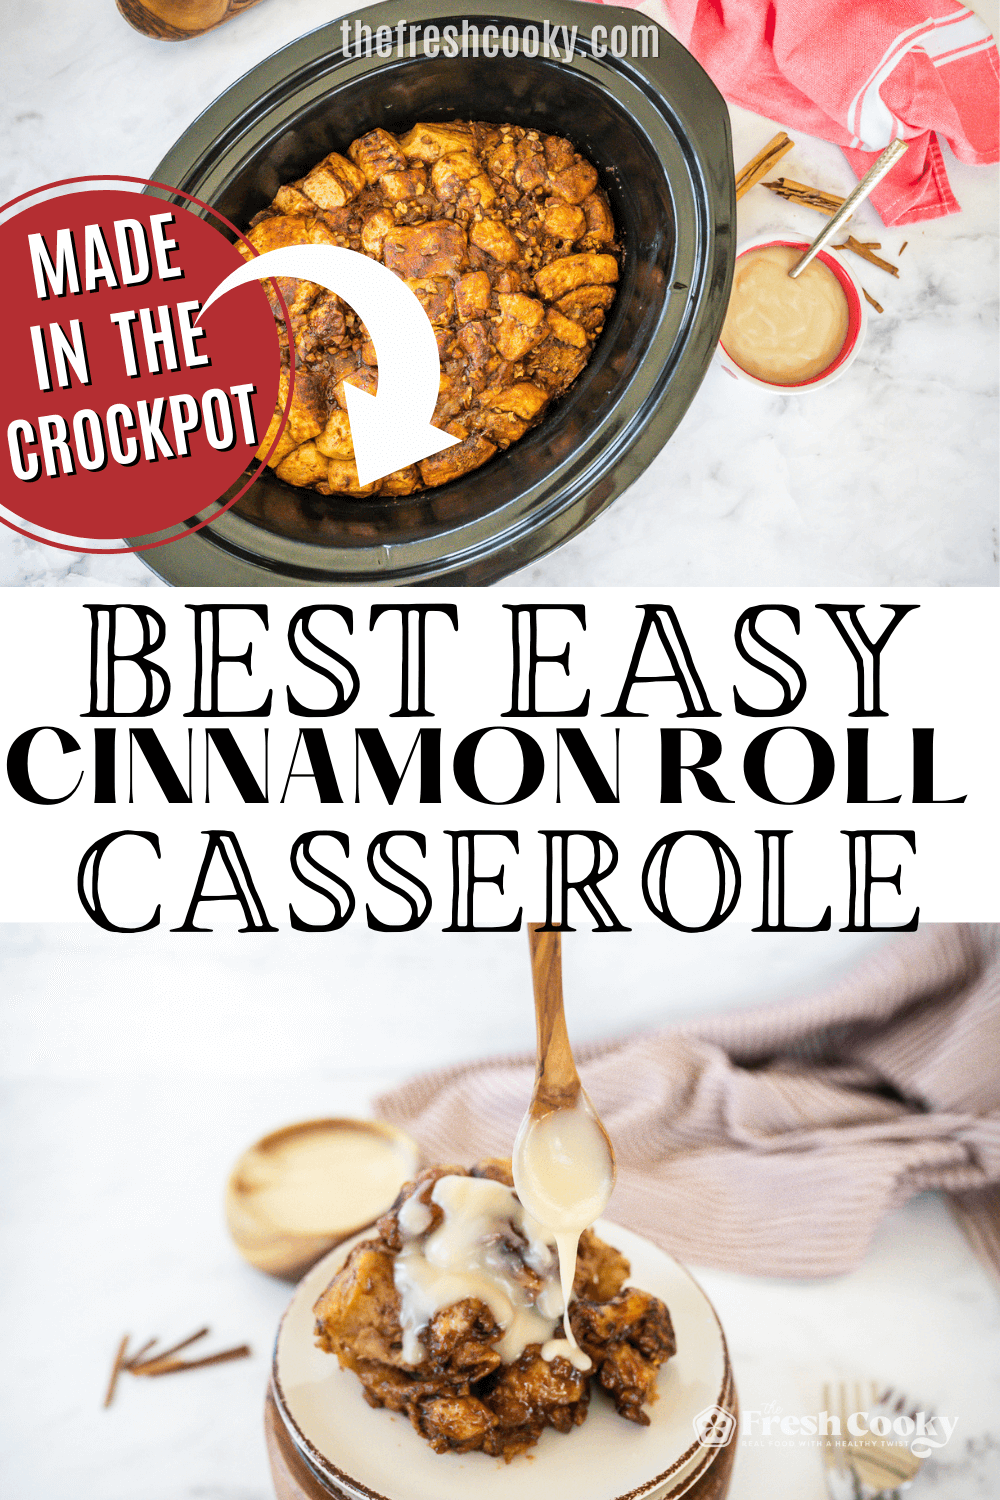 Best easy cinnamon roll casserole in crock pot and serving on plate, to pin.